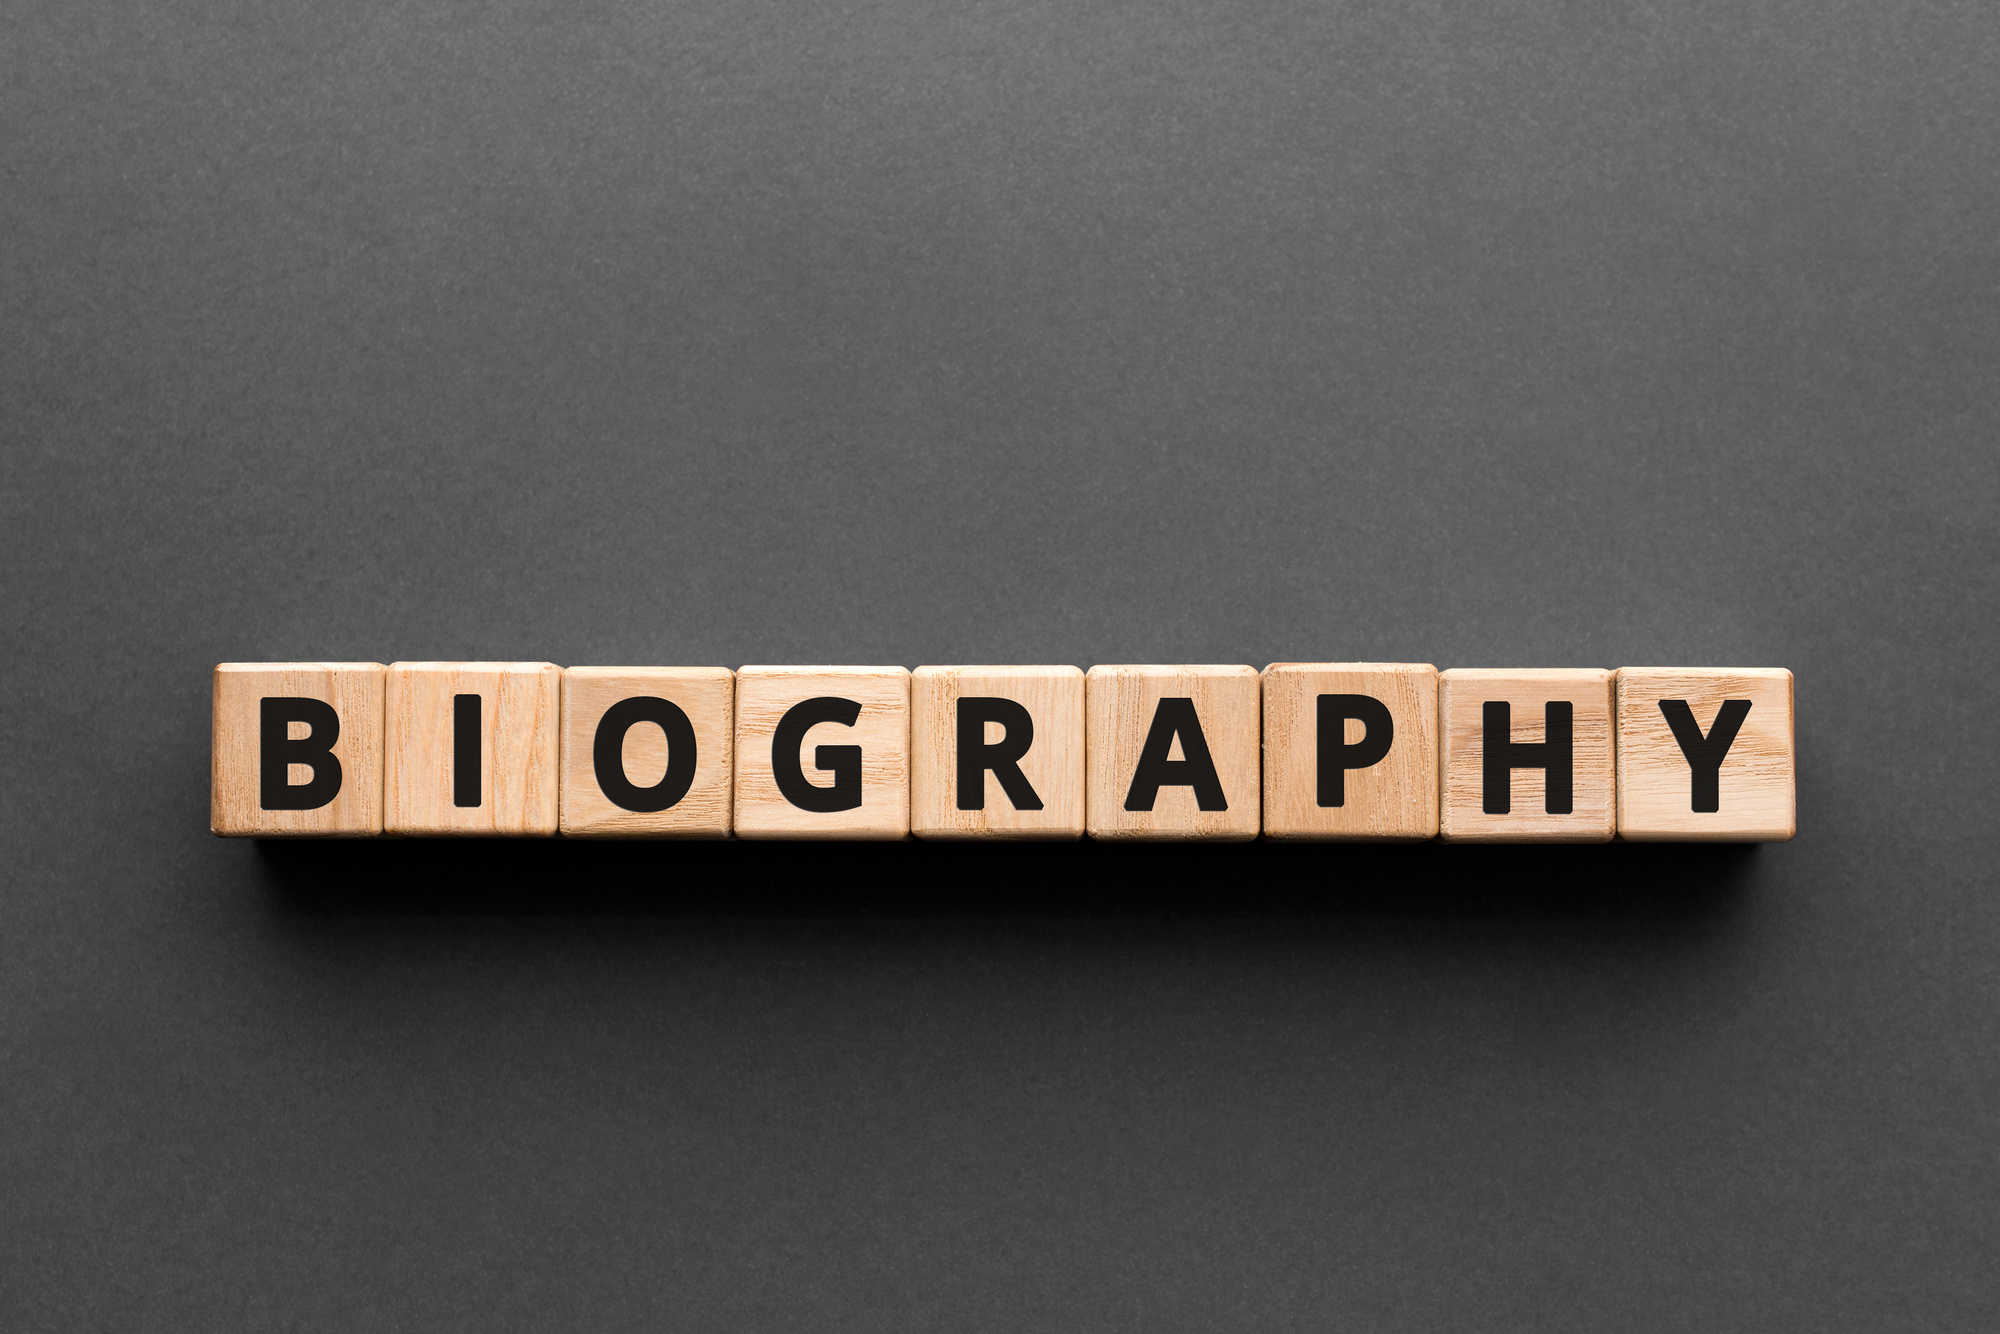 Biography - words from wooden blocks with letters